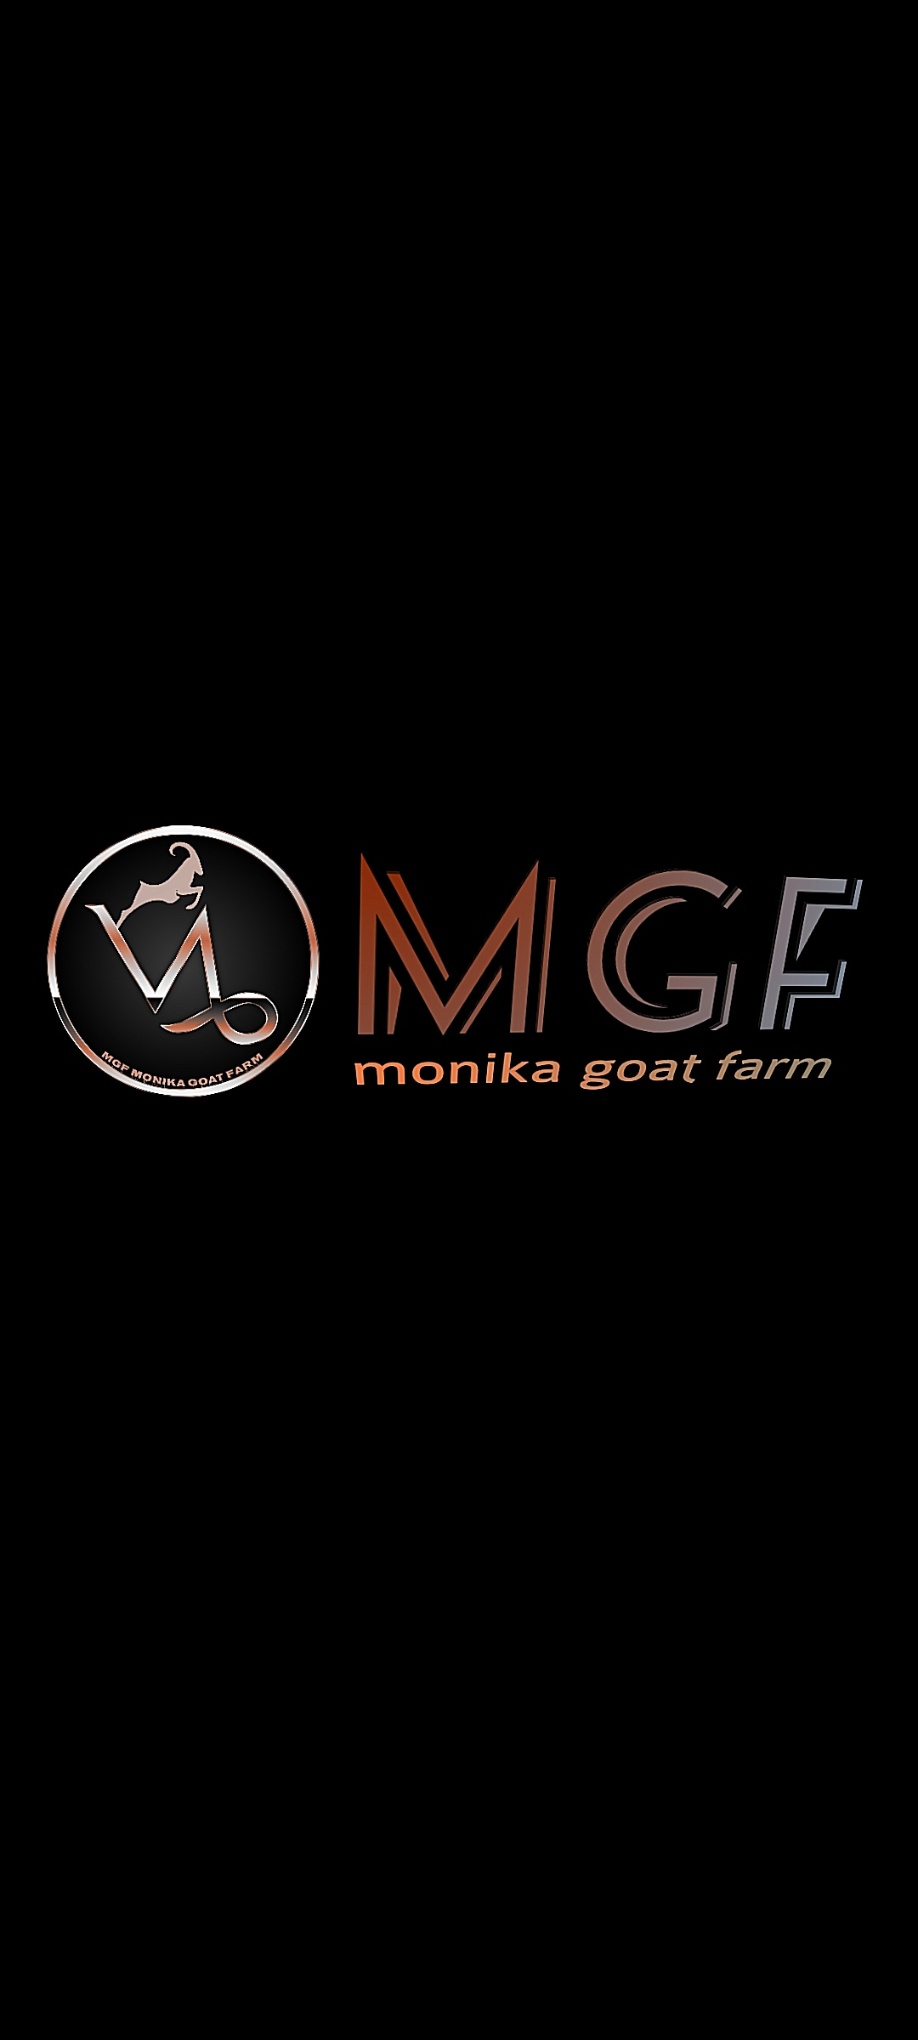 We, MGF monika goat farm, situated at Chitrasenpur, Howrah, West Bengal are one of the renowned and finest goat farms in the city. Goats are reared for milk and meat. Our range of products include Boer goats, Sojat goats, Jamnapari goats, Sirohi goats, Barbari goats, Beetal goats, etc. Our products are high in demand due to their premium quality and affordable prices. We deliver the goats to our valuable customers as per their demands.